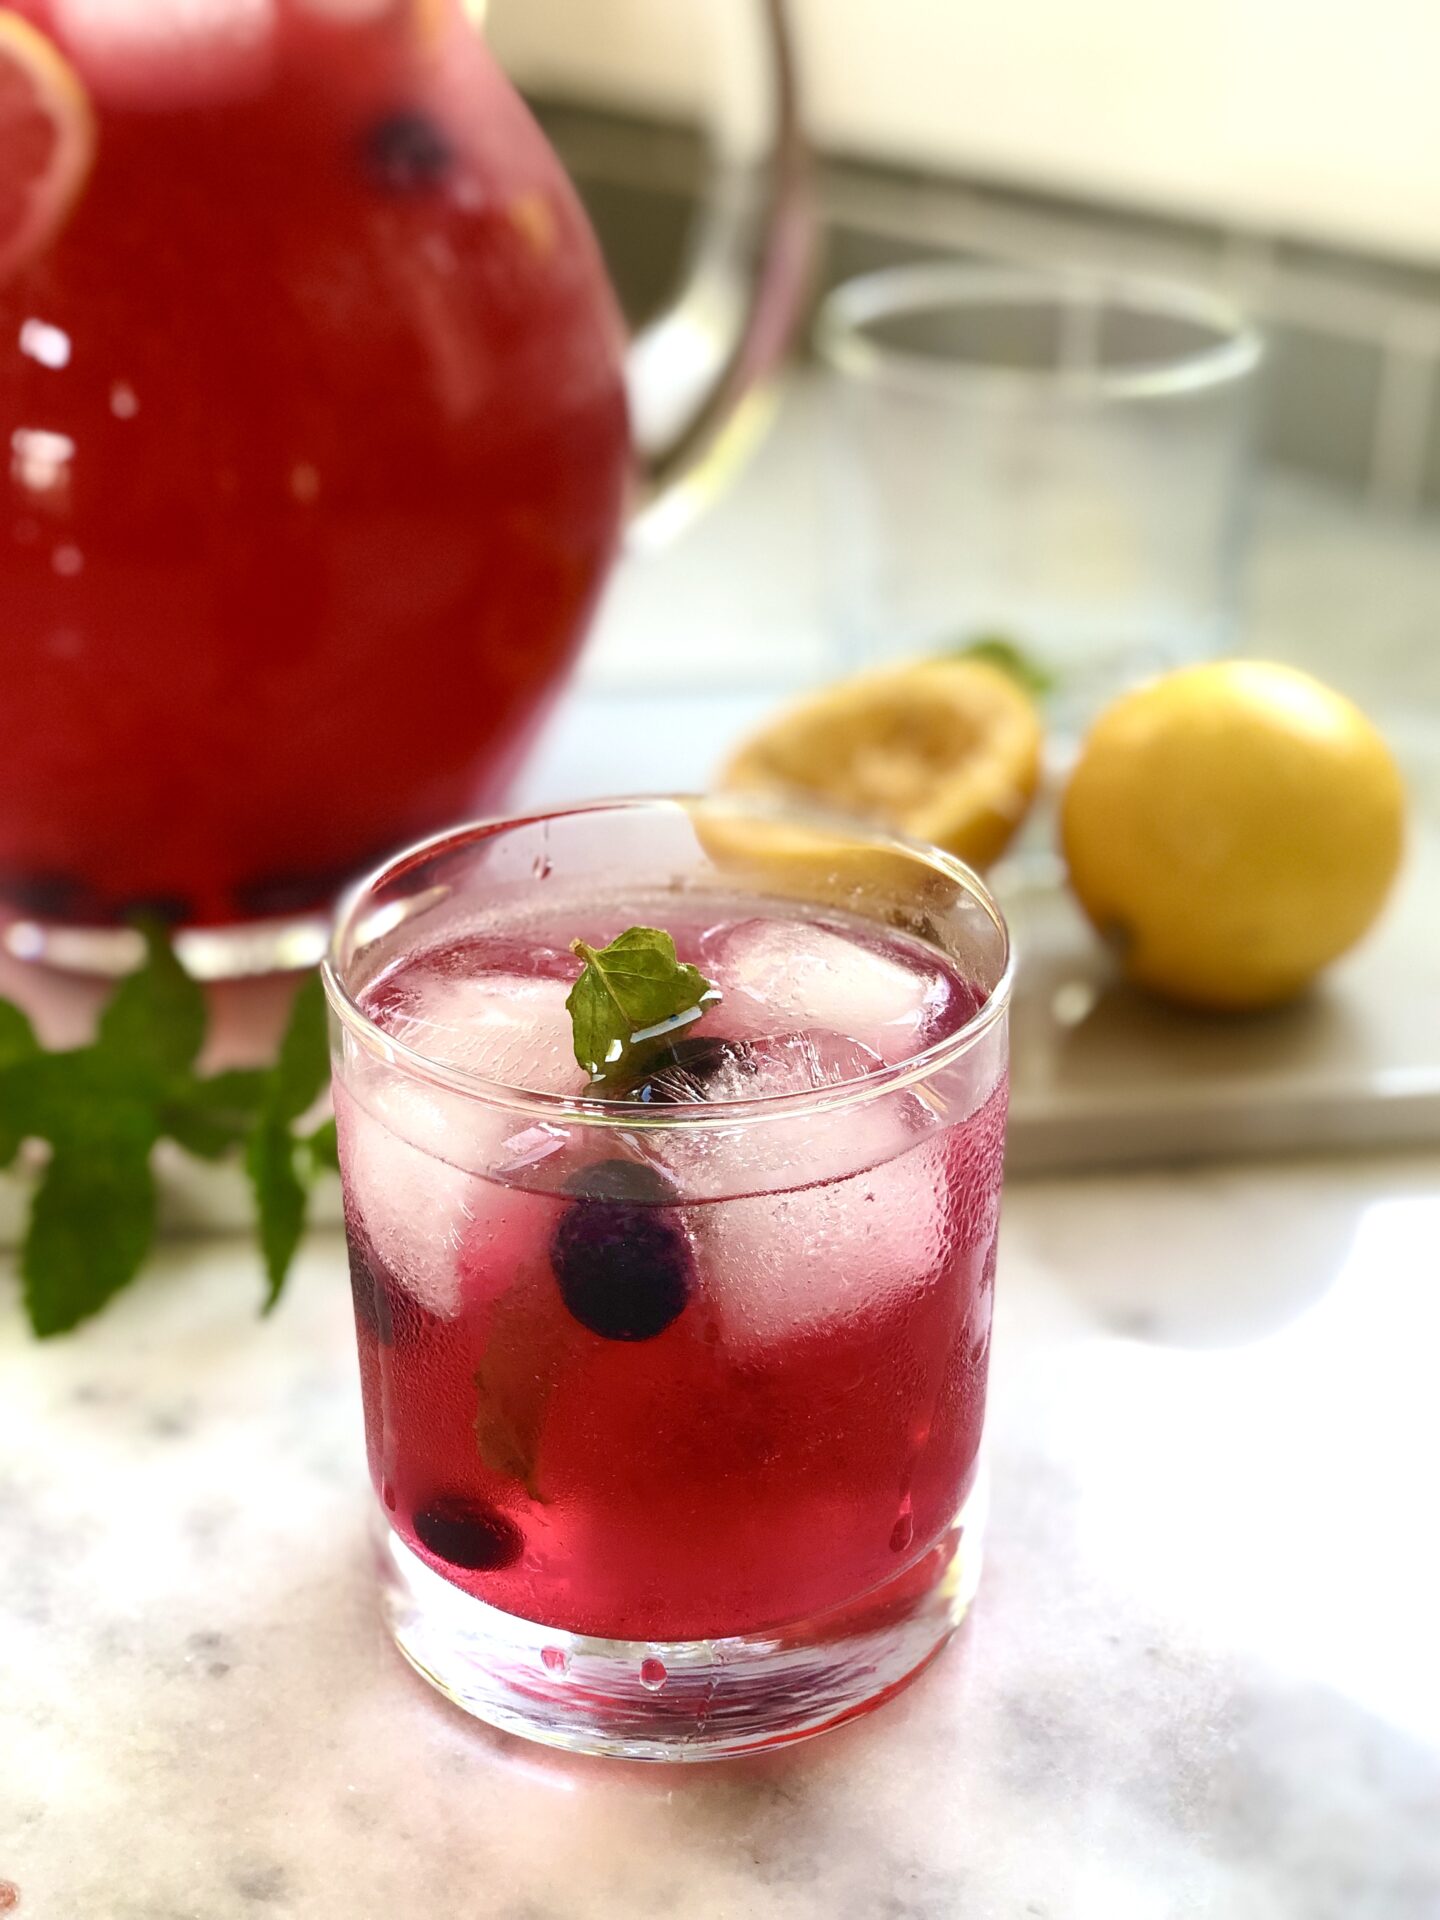 Glass filled with blueberry lavender lemonade garnished with ice blueberries and mint leaves